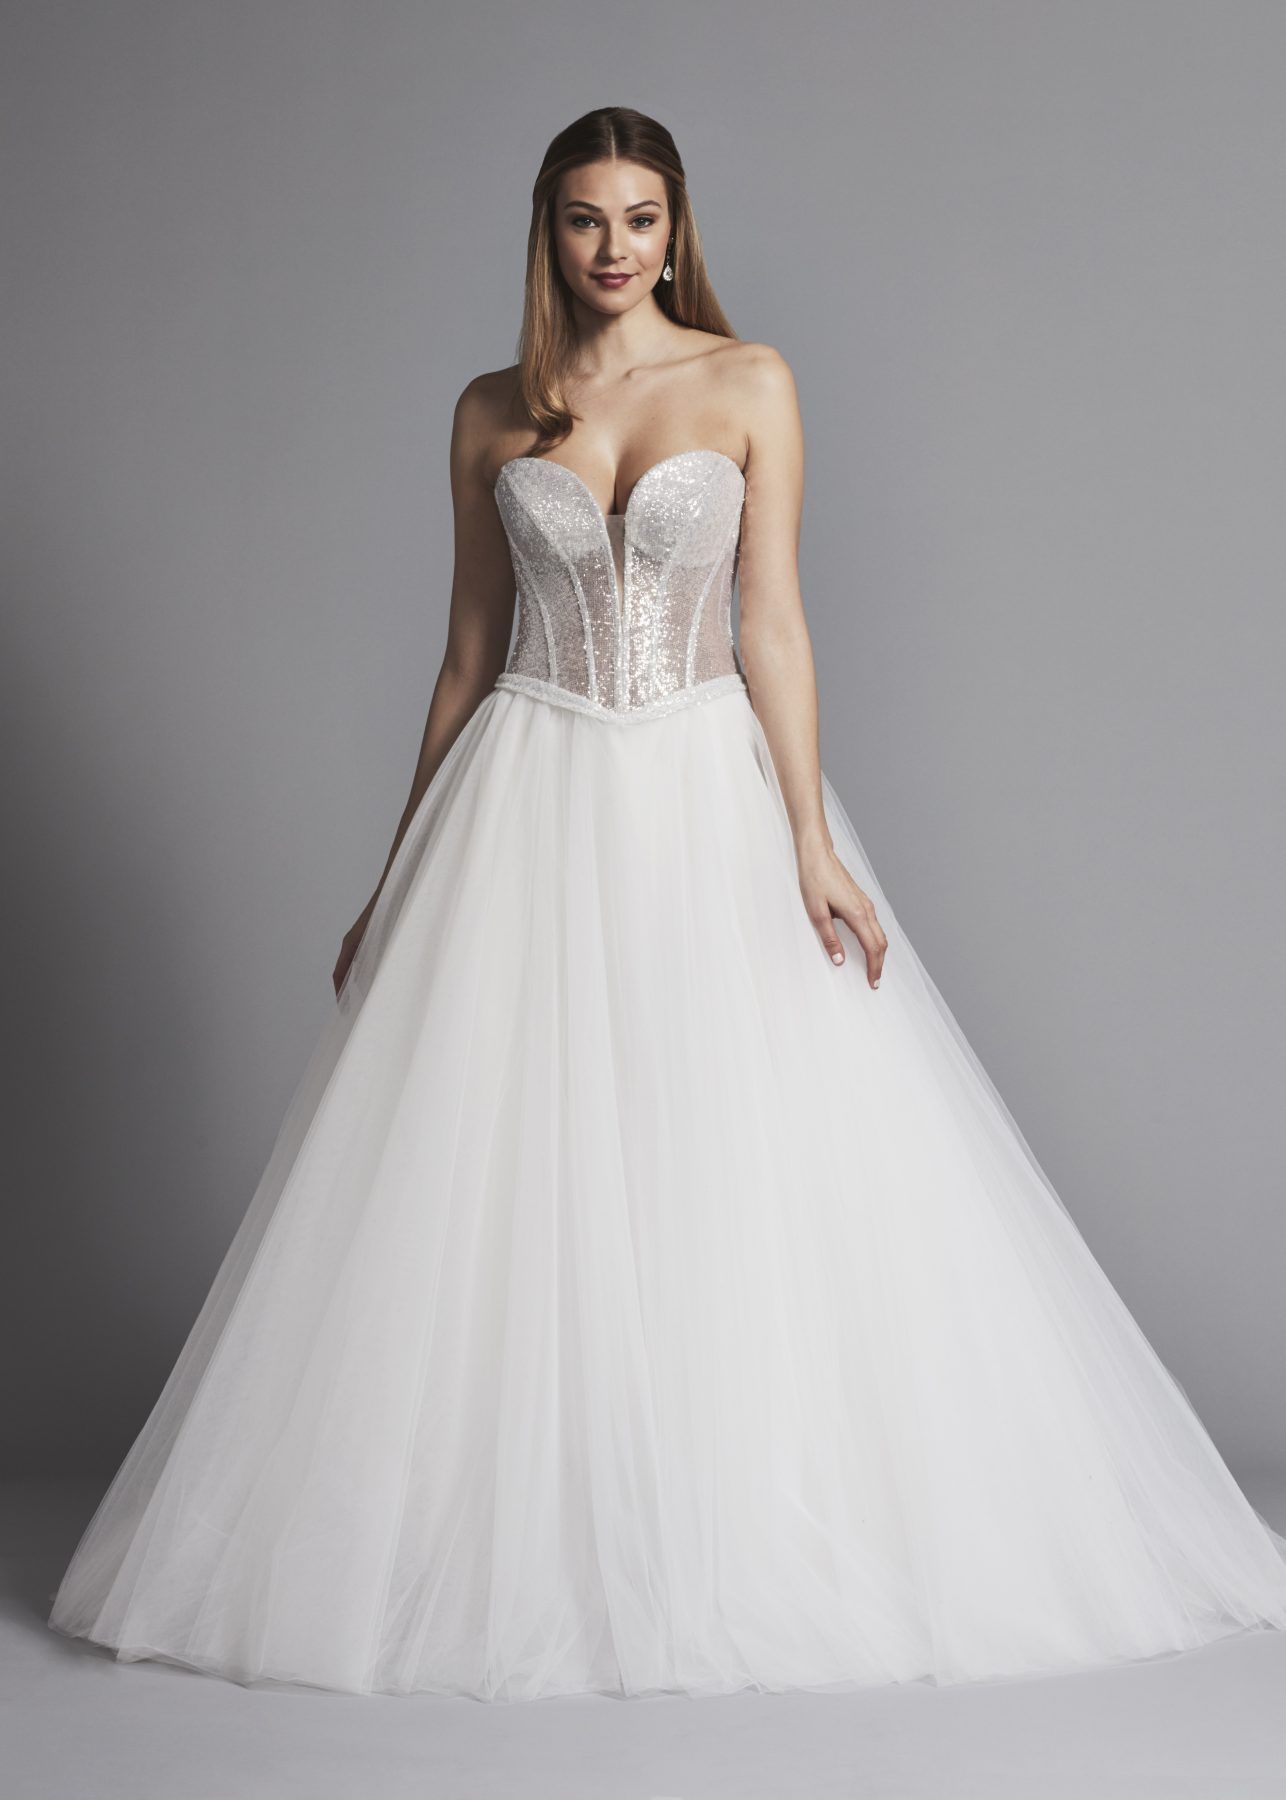 Strapless Tulle Ball Gown Wedding Dress With Sweetheart Neckline References